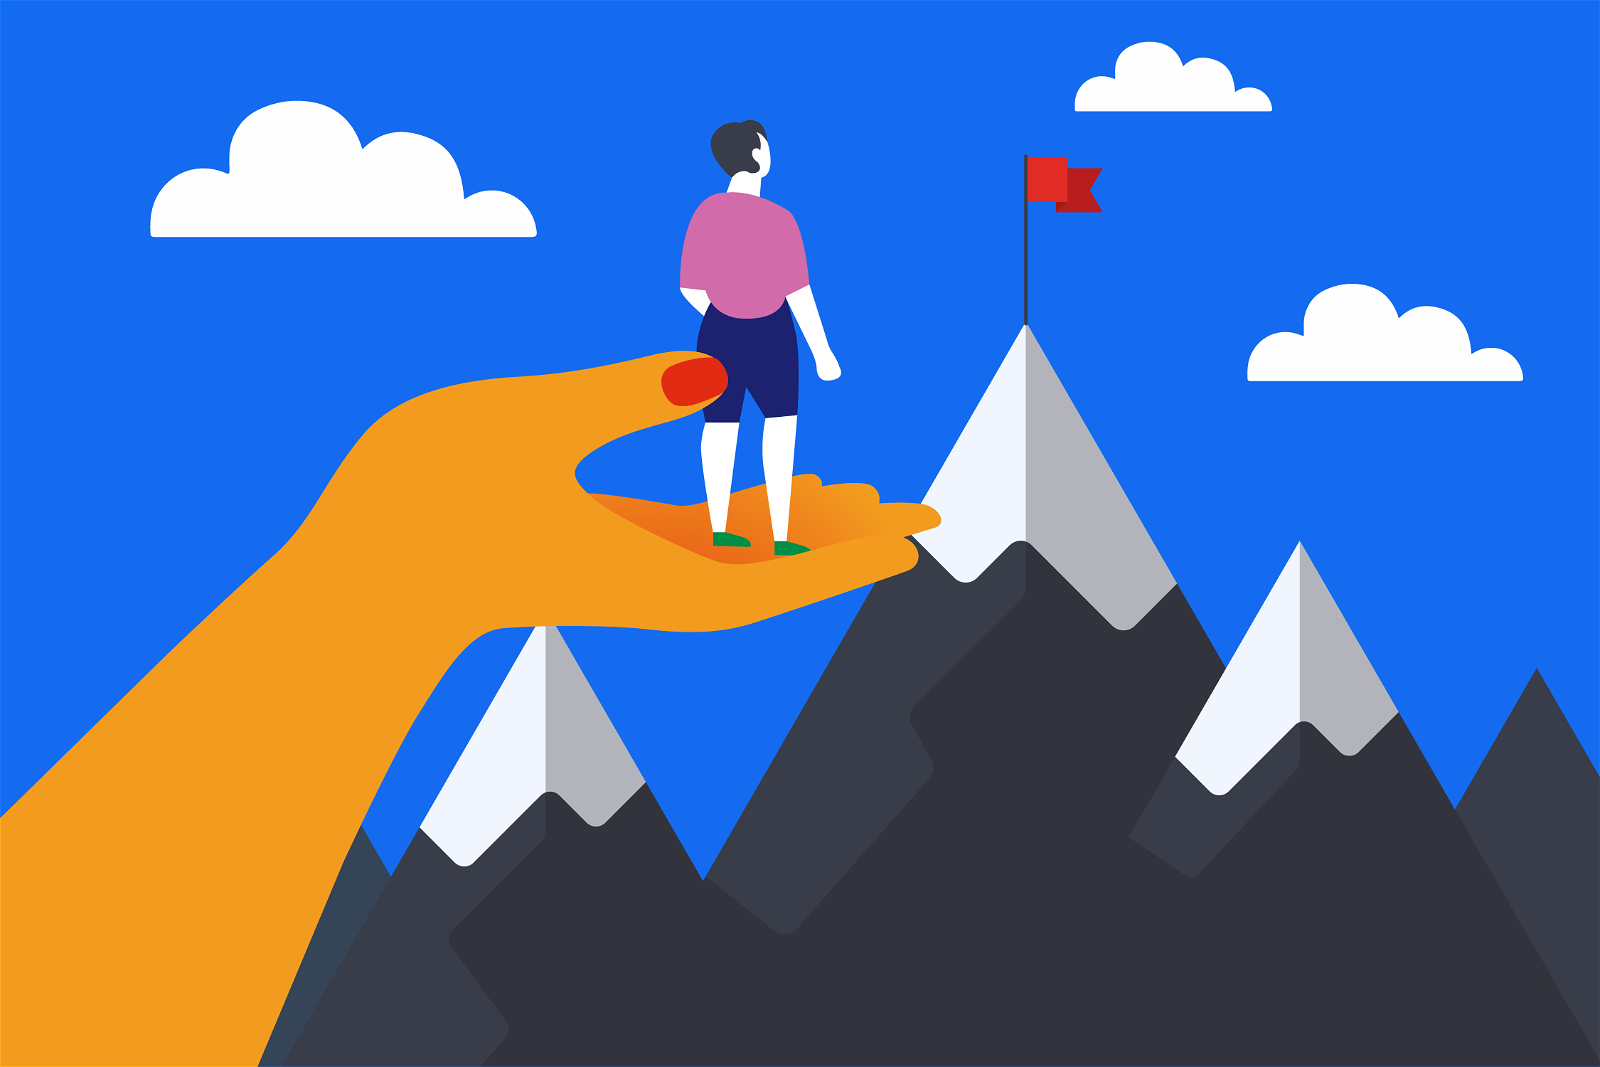 Illustration of a person standing on a giant hand, overlooking a mountain range. The person, wearing a pink shirt and blue shorts, gazes at a red flag on a mountain peak. The sky is bright blue with several fluffy white clouds scattered across it. The scene symbolizes support and goal achievement.